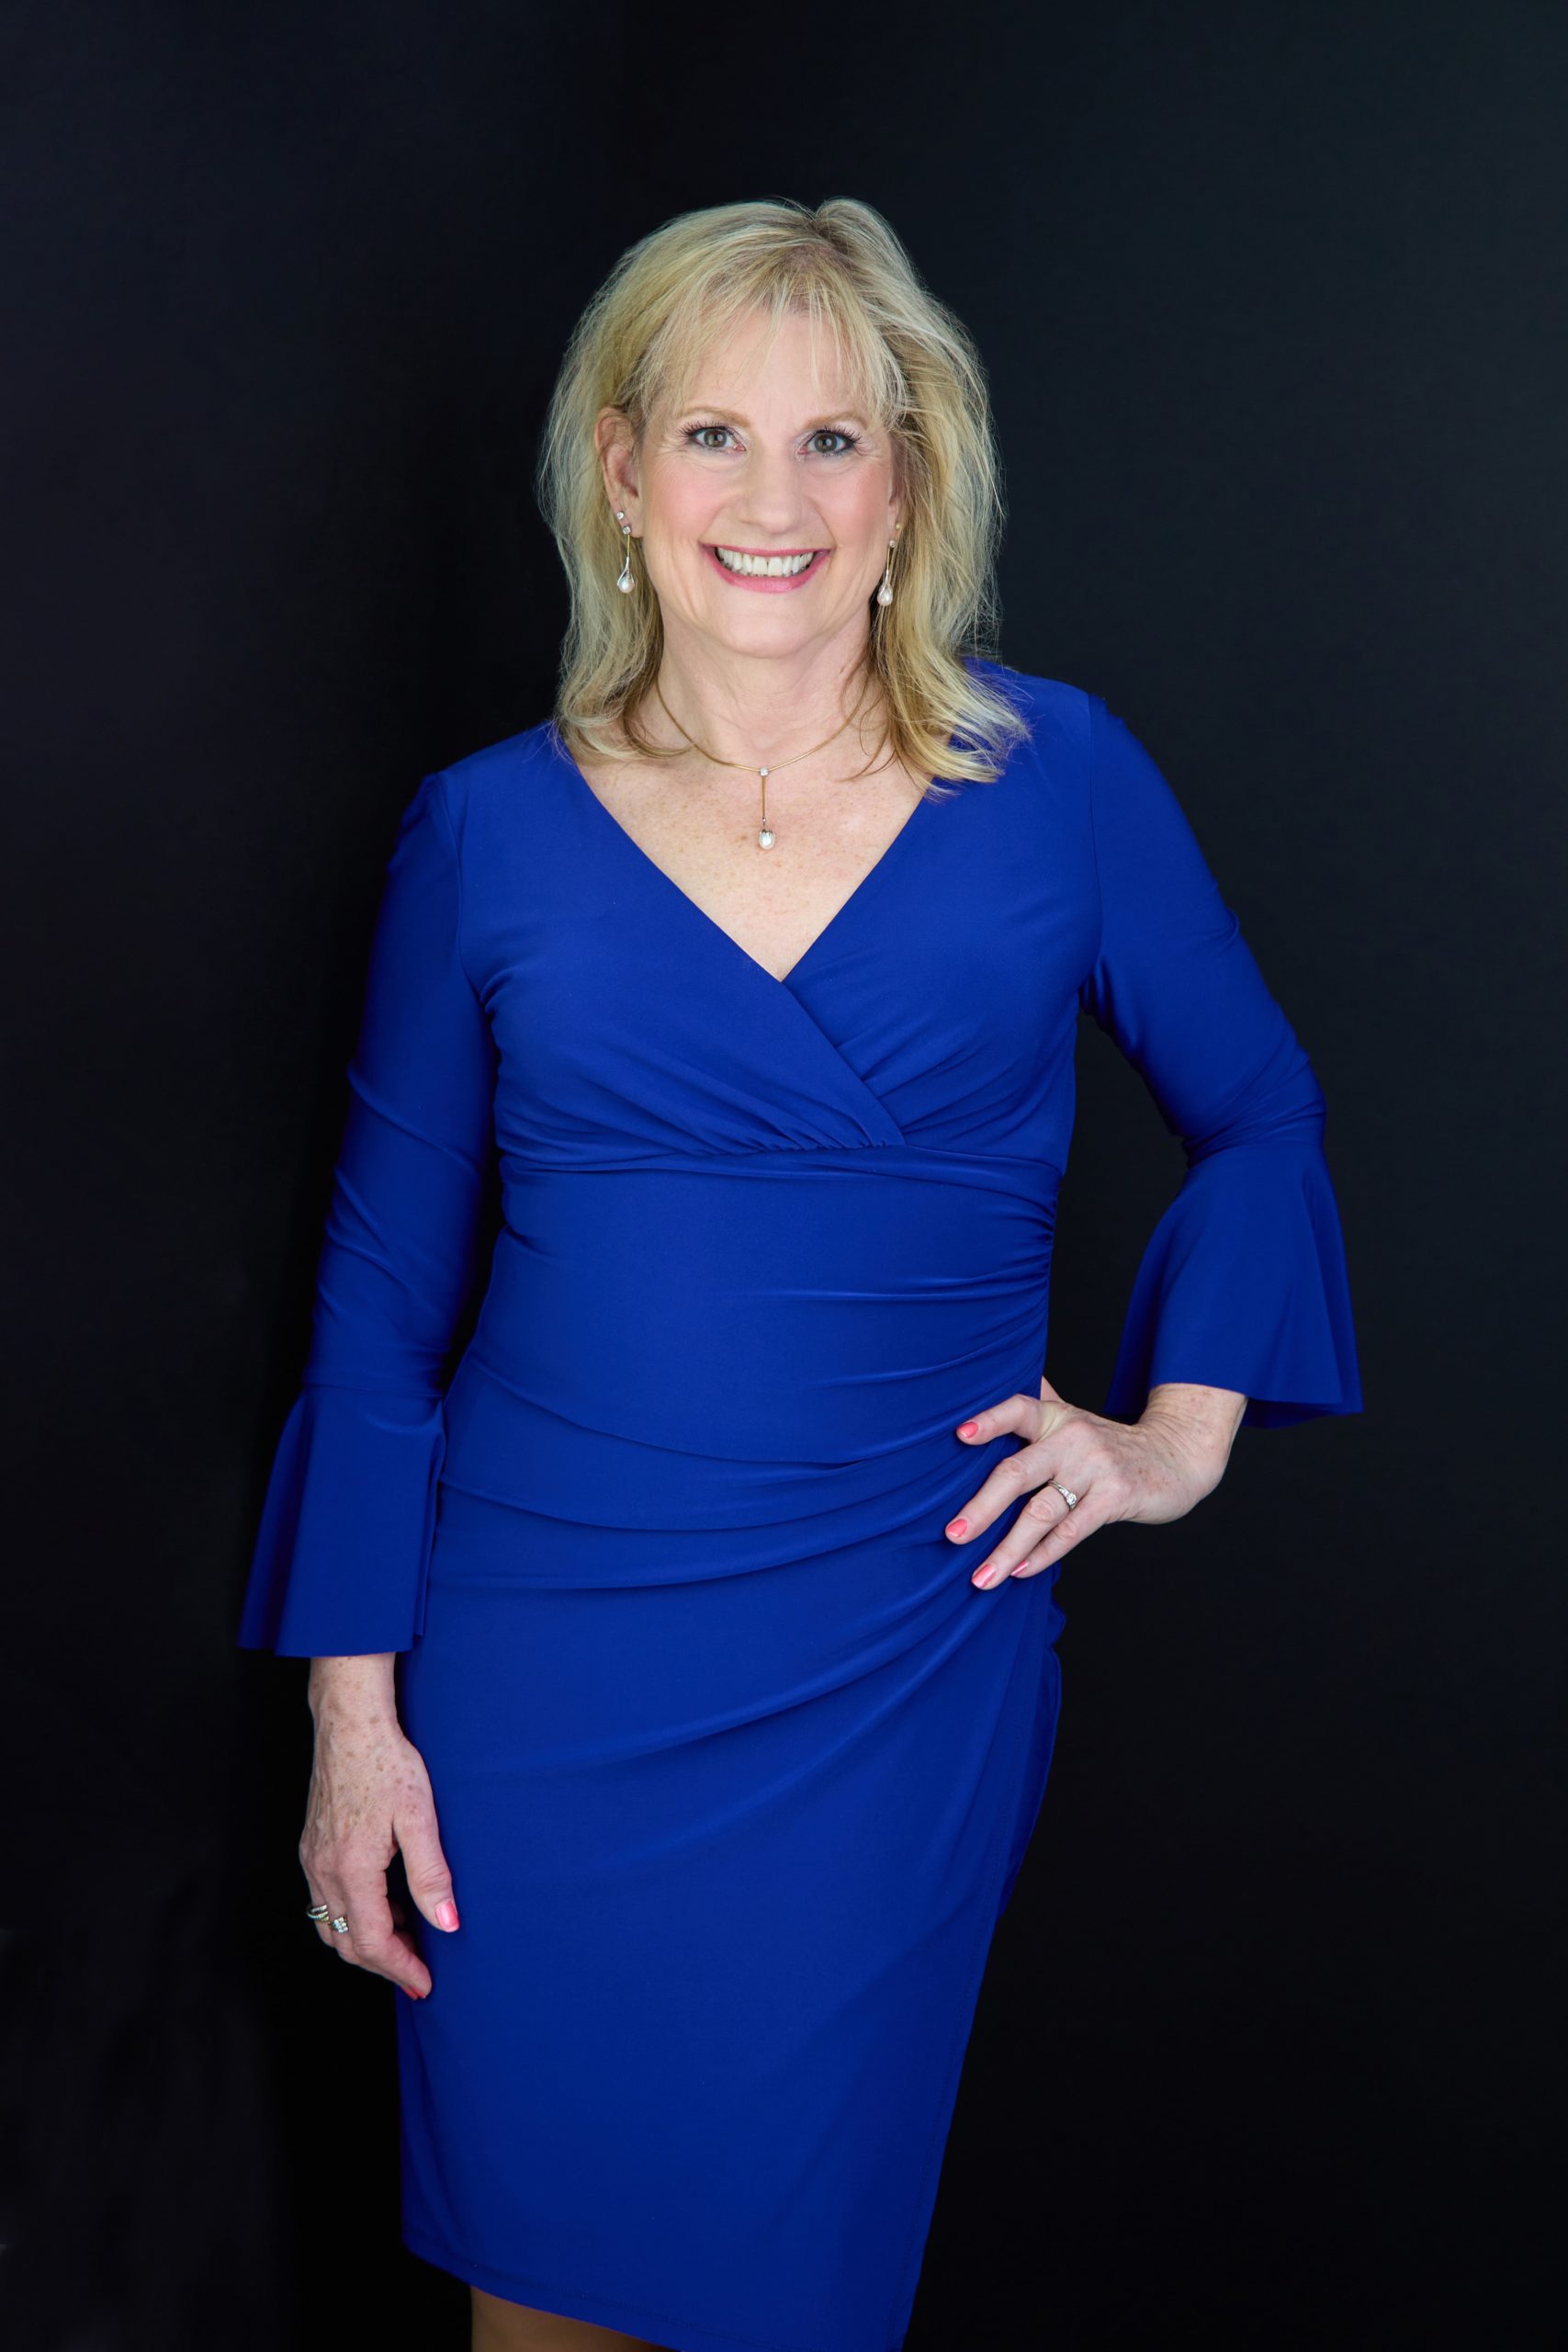 Karen Covy Divorce Coach and Lawyer in a blue dress against a black background